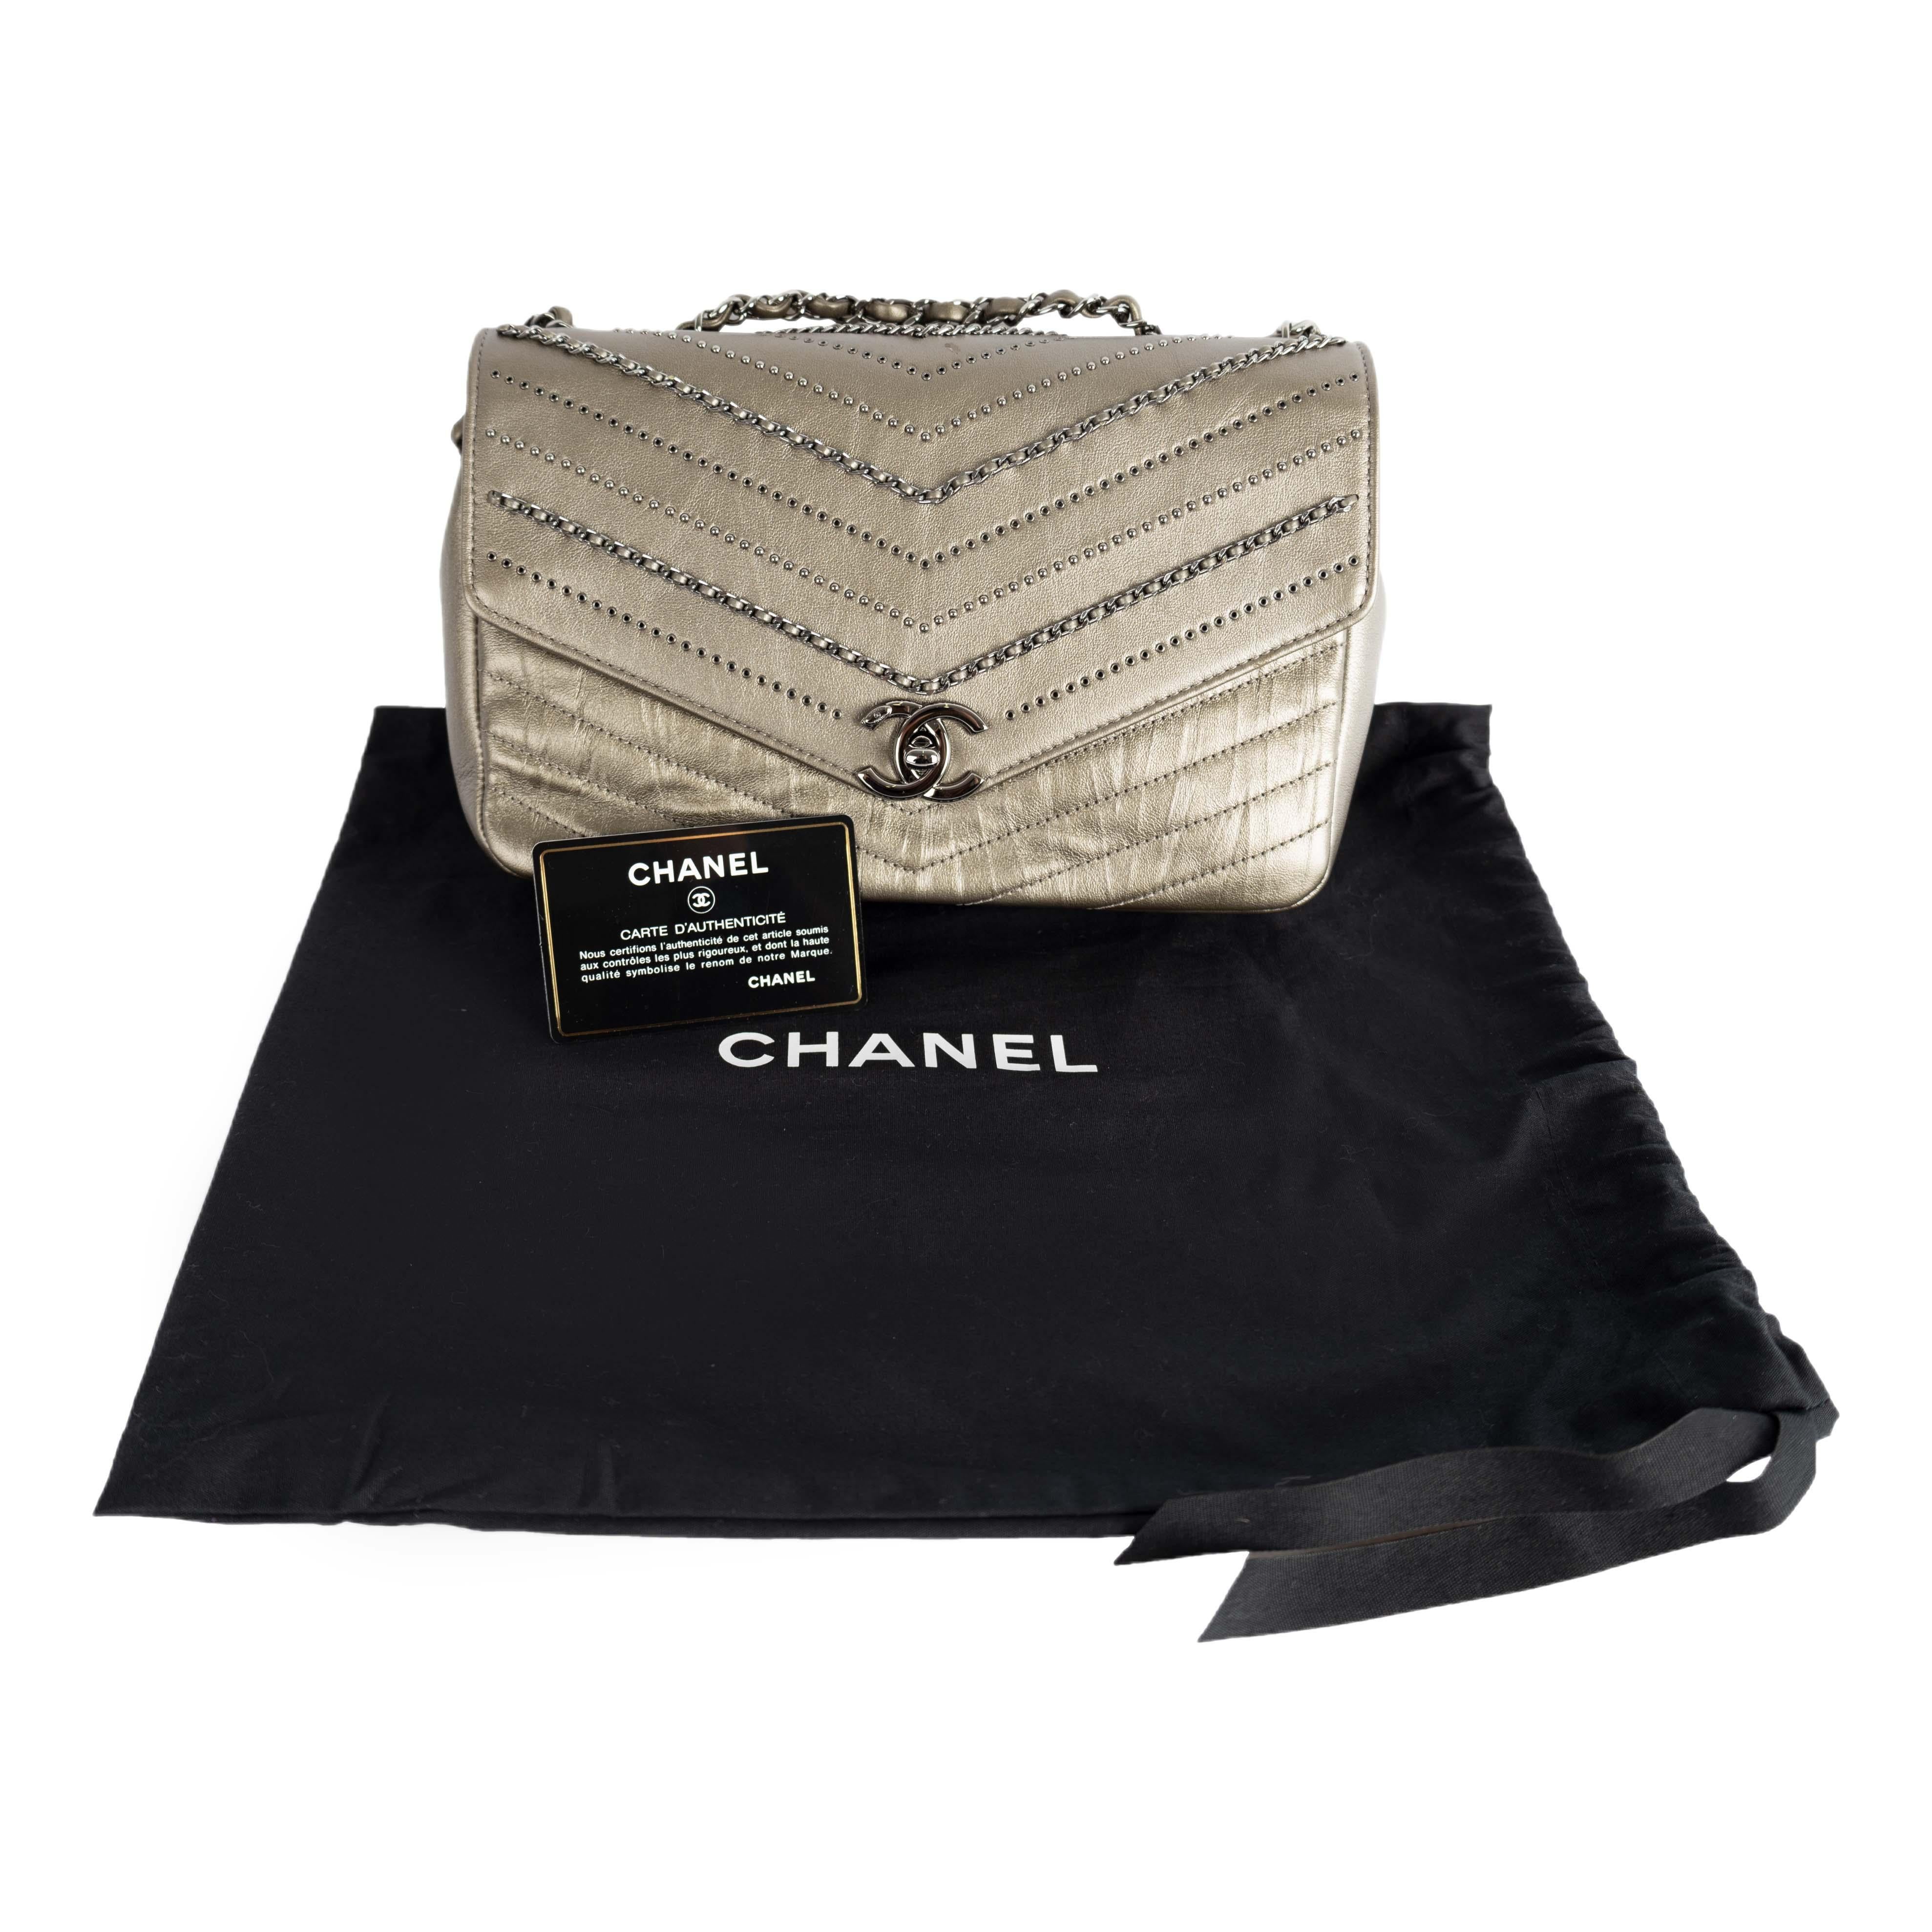 Chanel Embelished 'Chain Sequins' Chevron Flap Bag - '10s For Sale 8